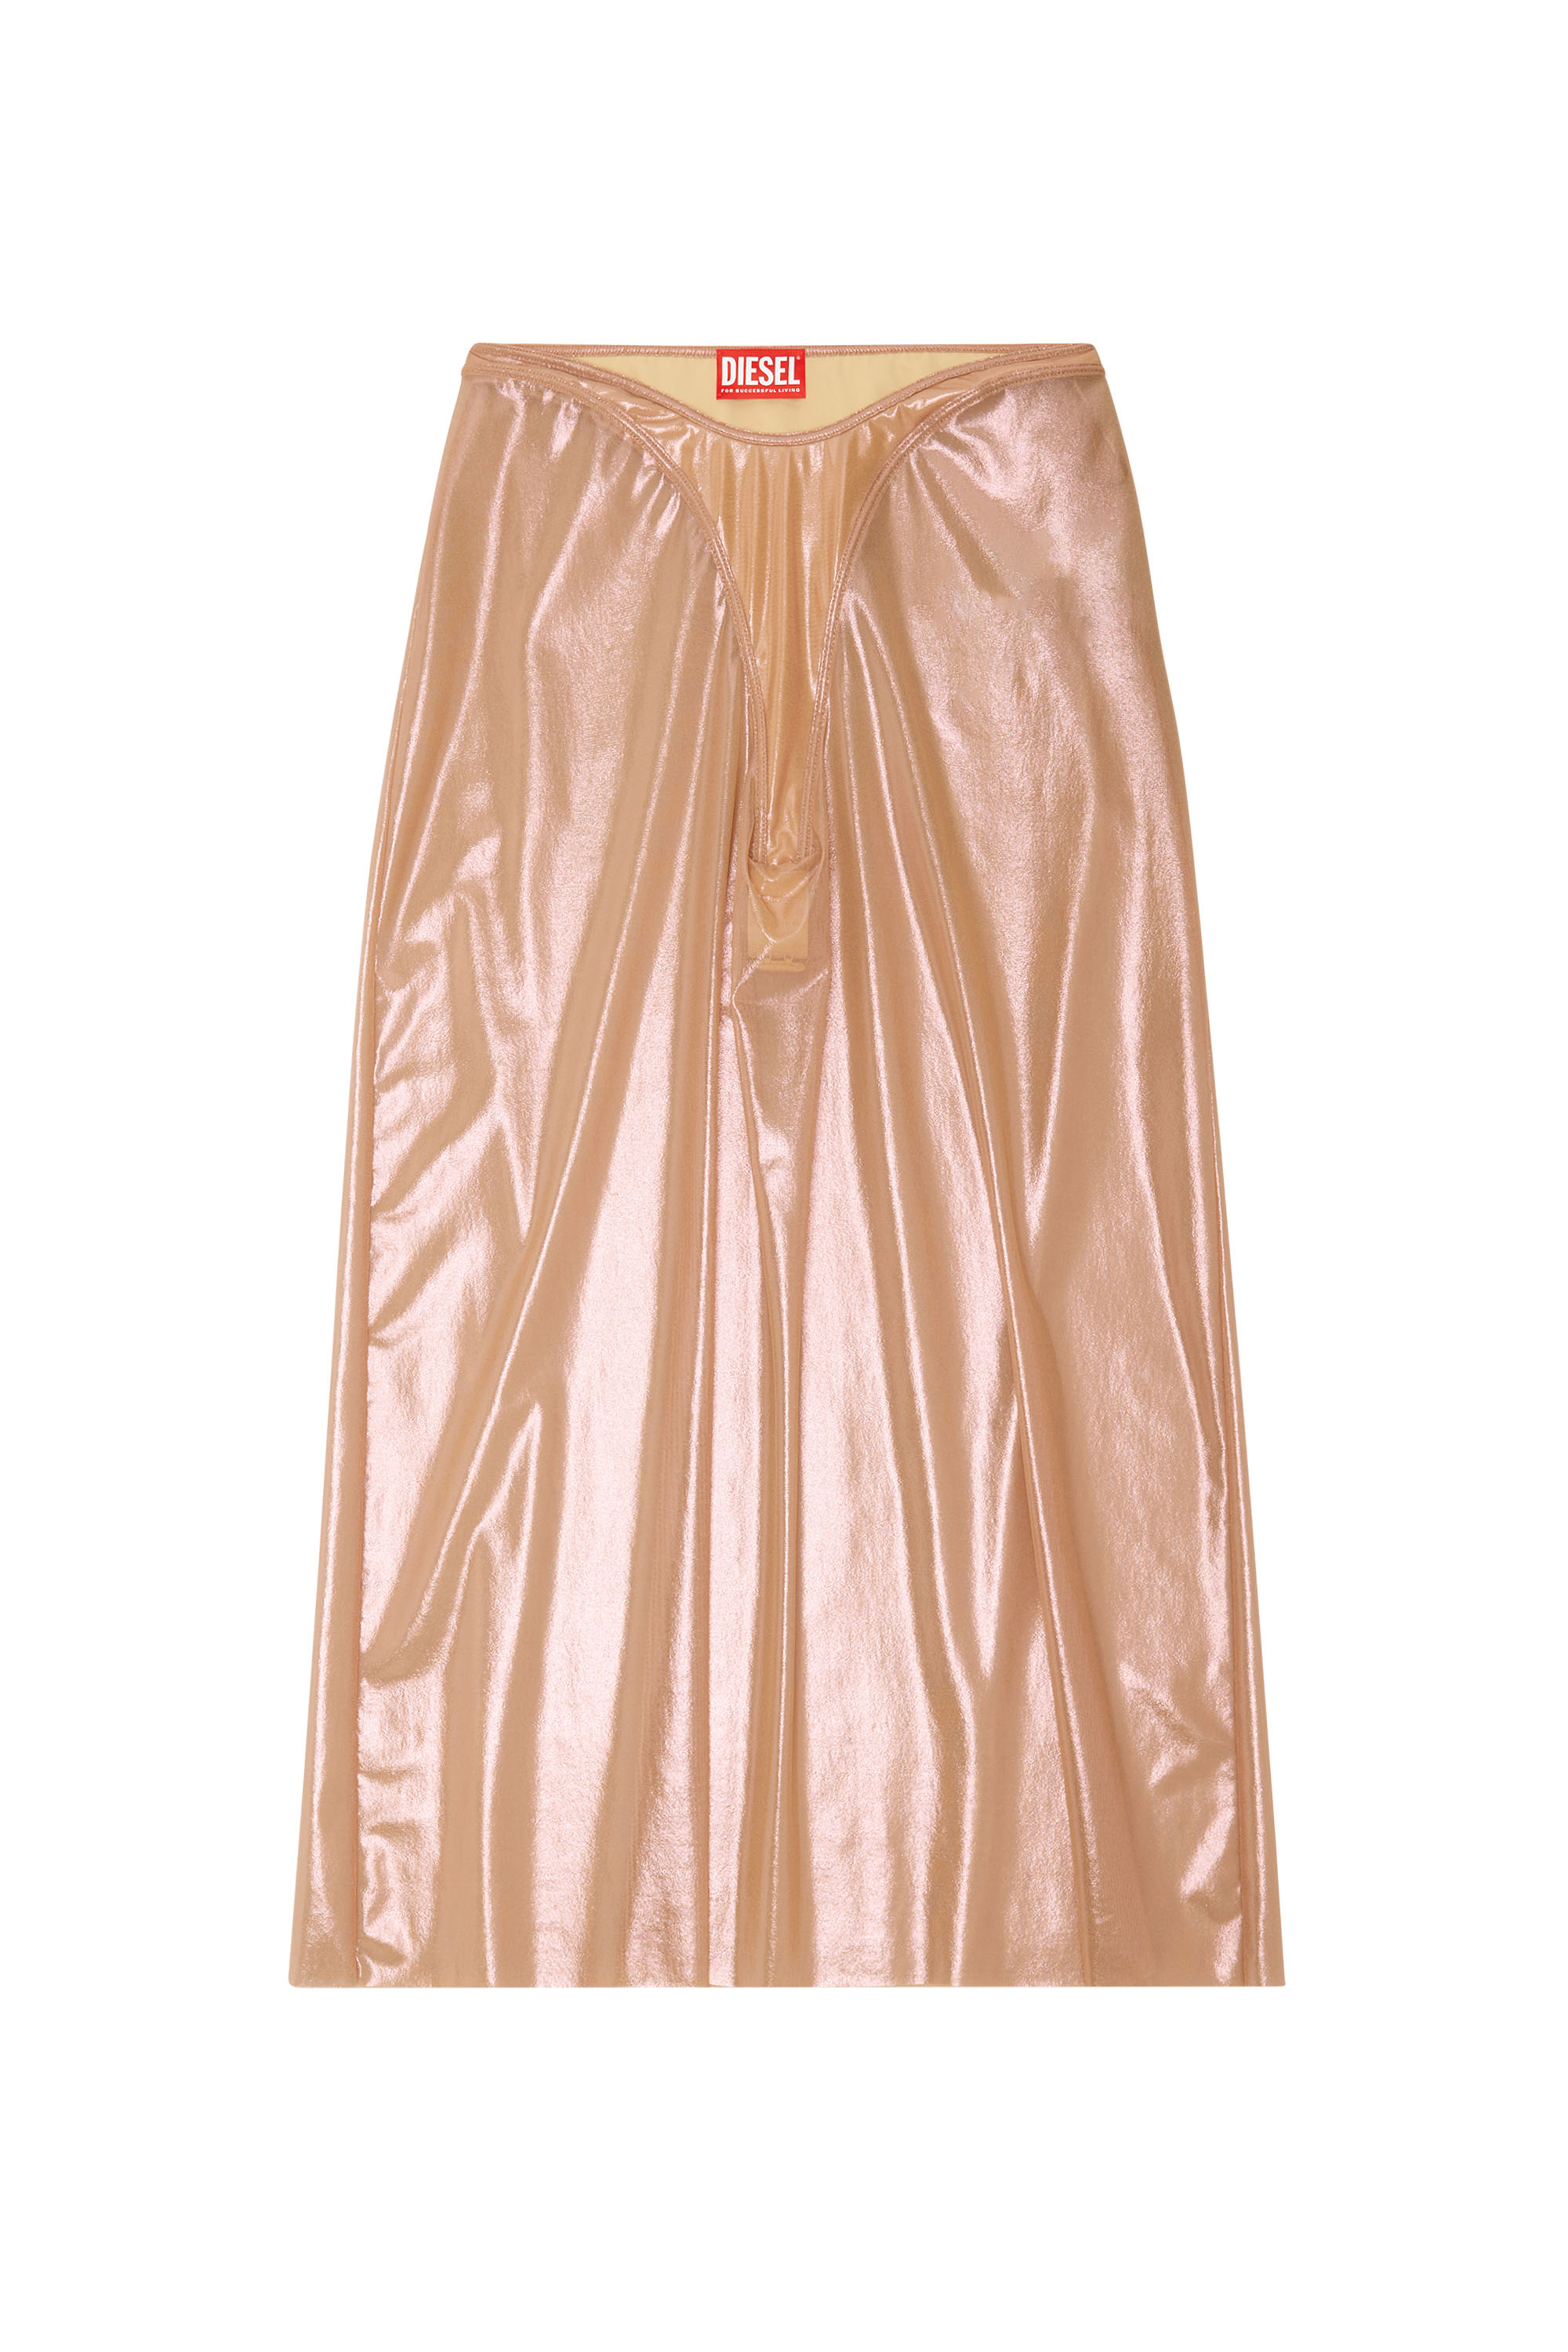 Diesel - O-MONI, Woman Sheer midi skirt in shiny coated tulle in Pink - Image 3